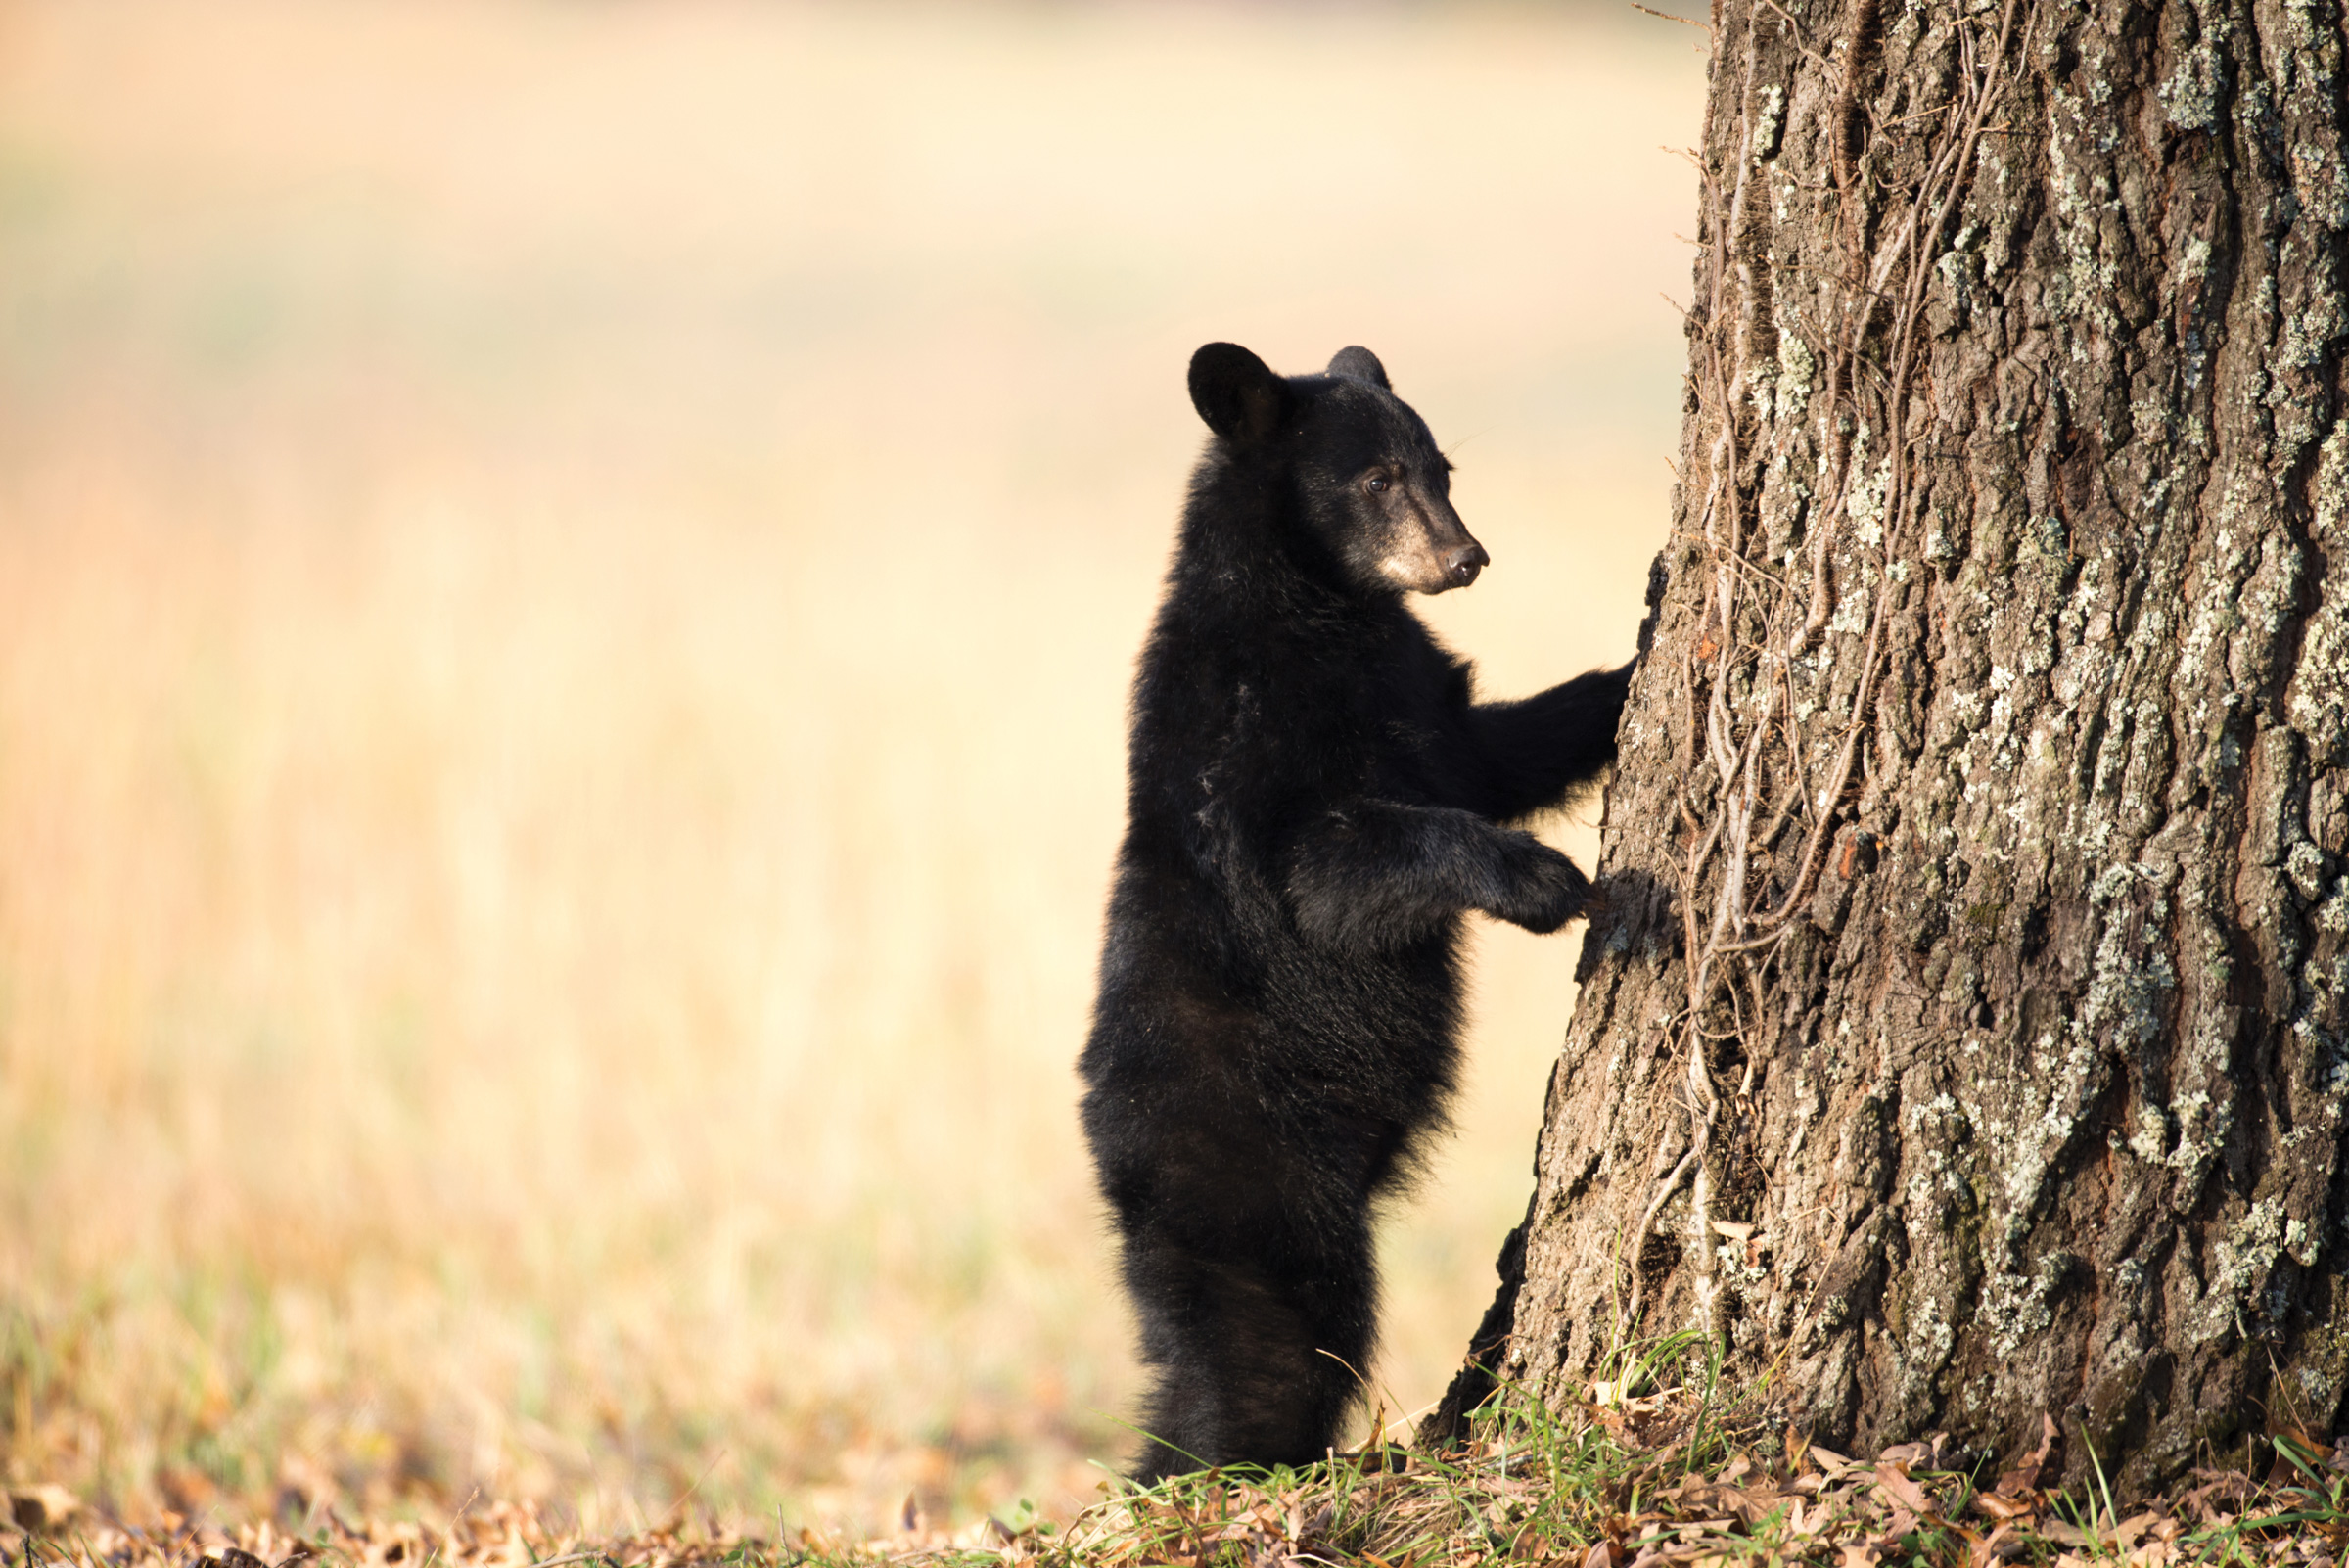 A young black bear pauses at the base of a tree